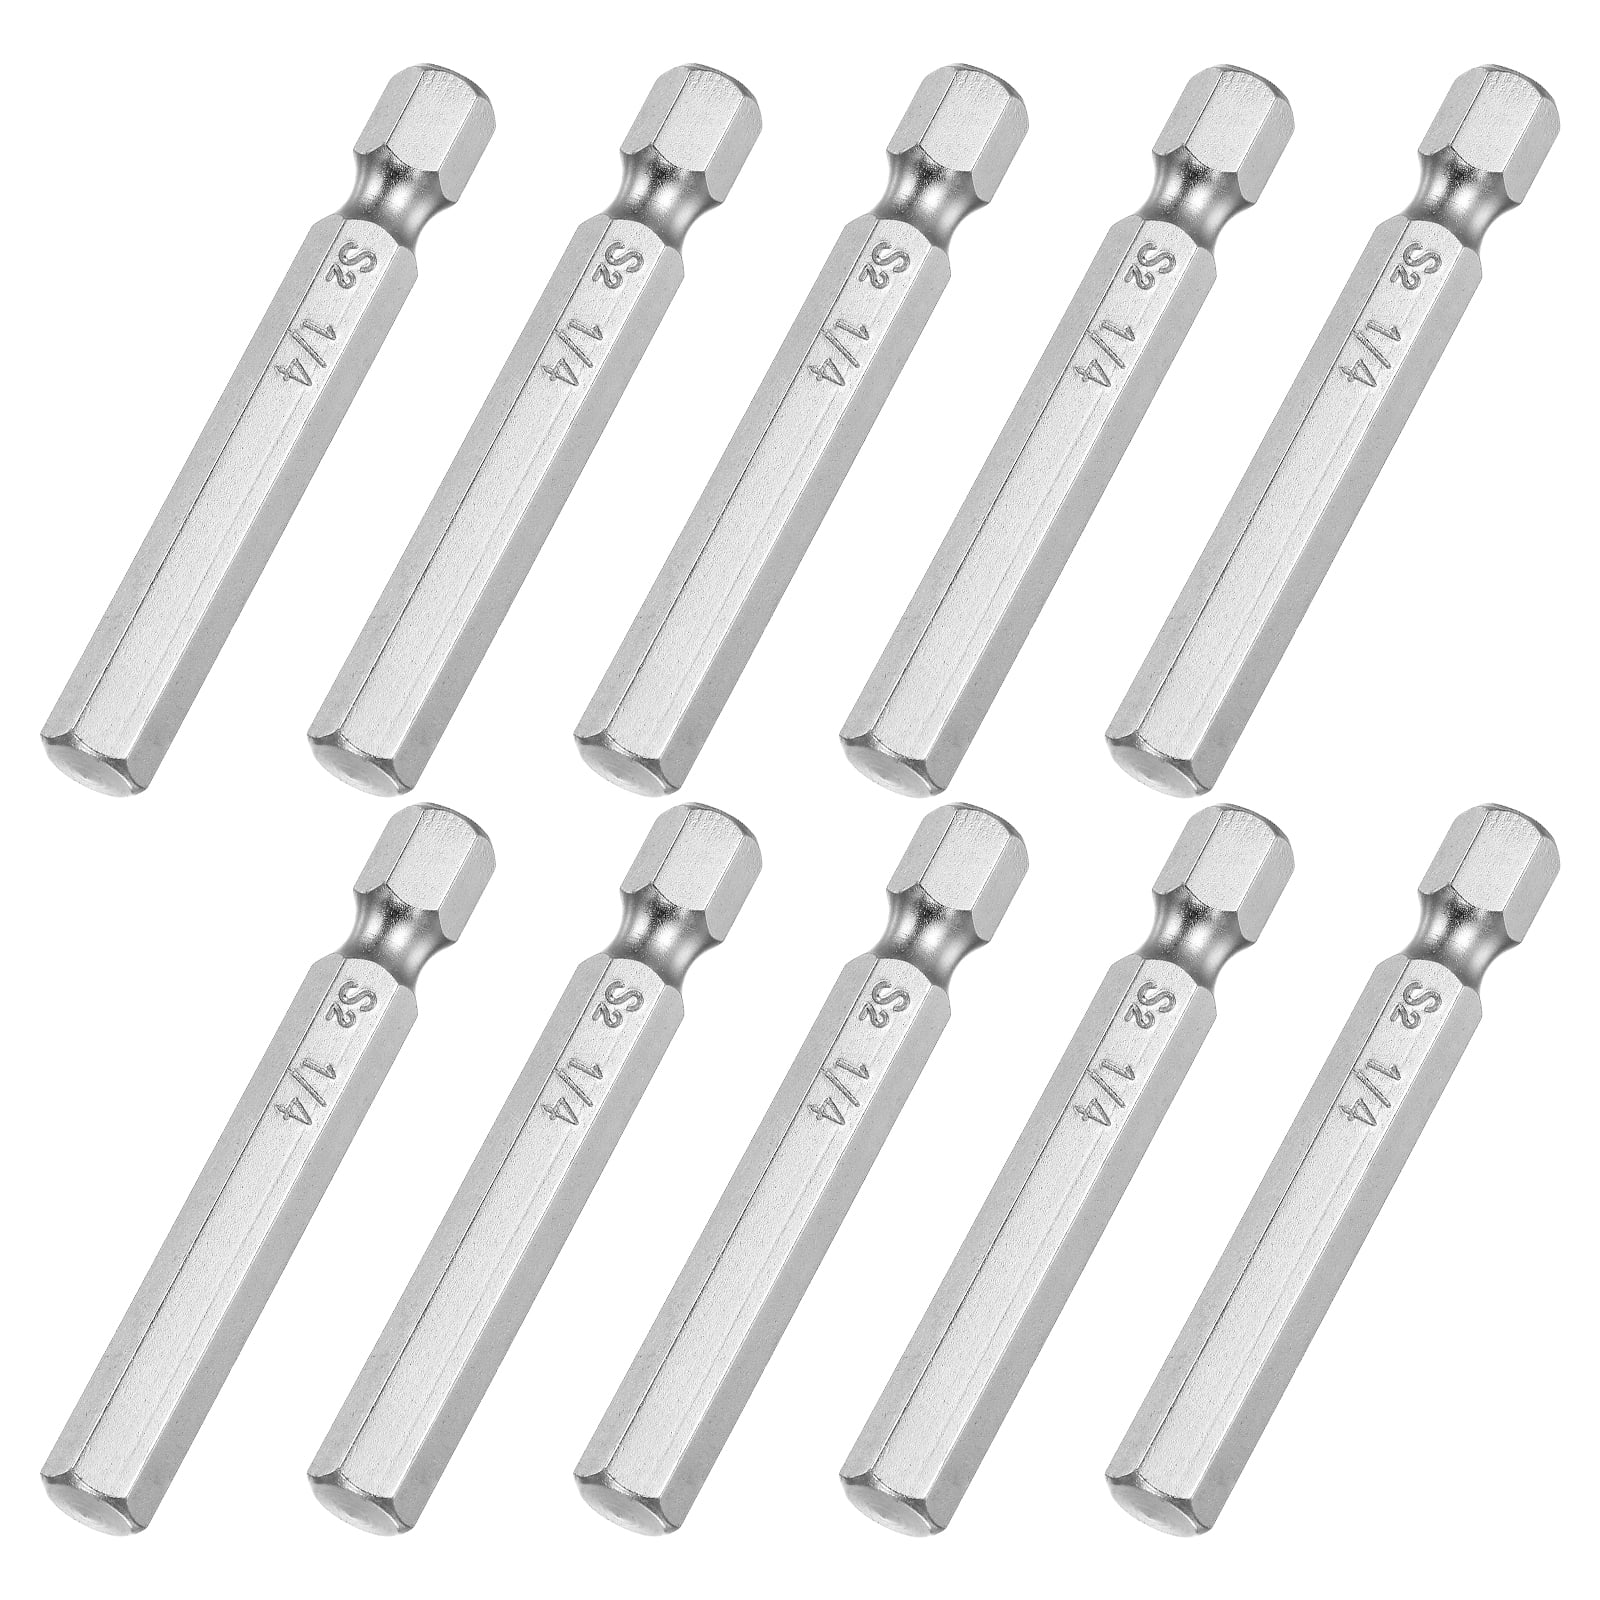 Uxcell 5/16 inch Magnetic Hex Head Screwdriver Bit, 1/4 inch Hex Shank 2 inch Length S2 Steel Power Tool, 10 Pack, Silver